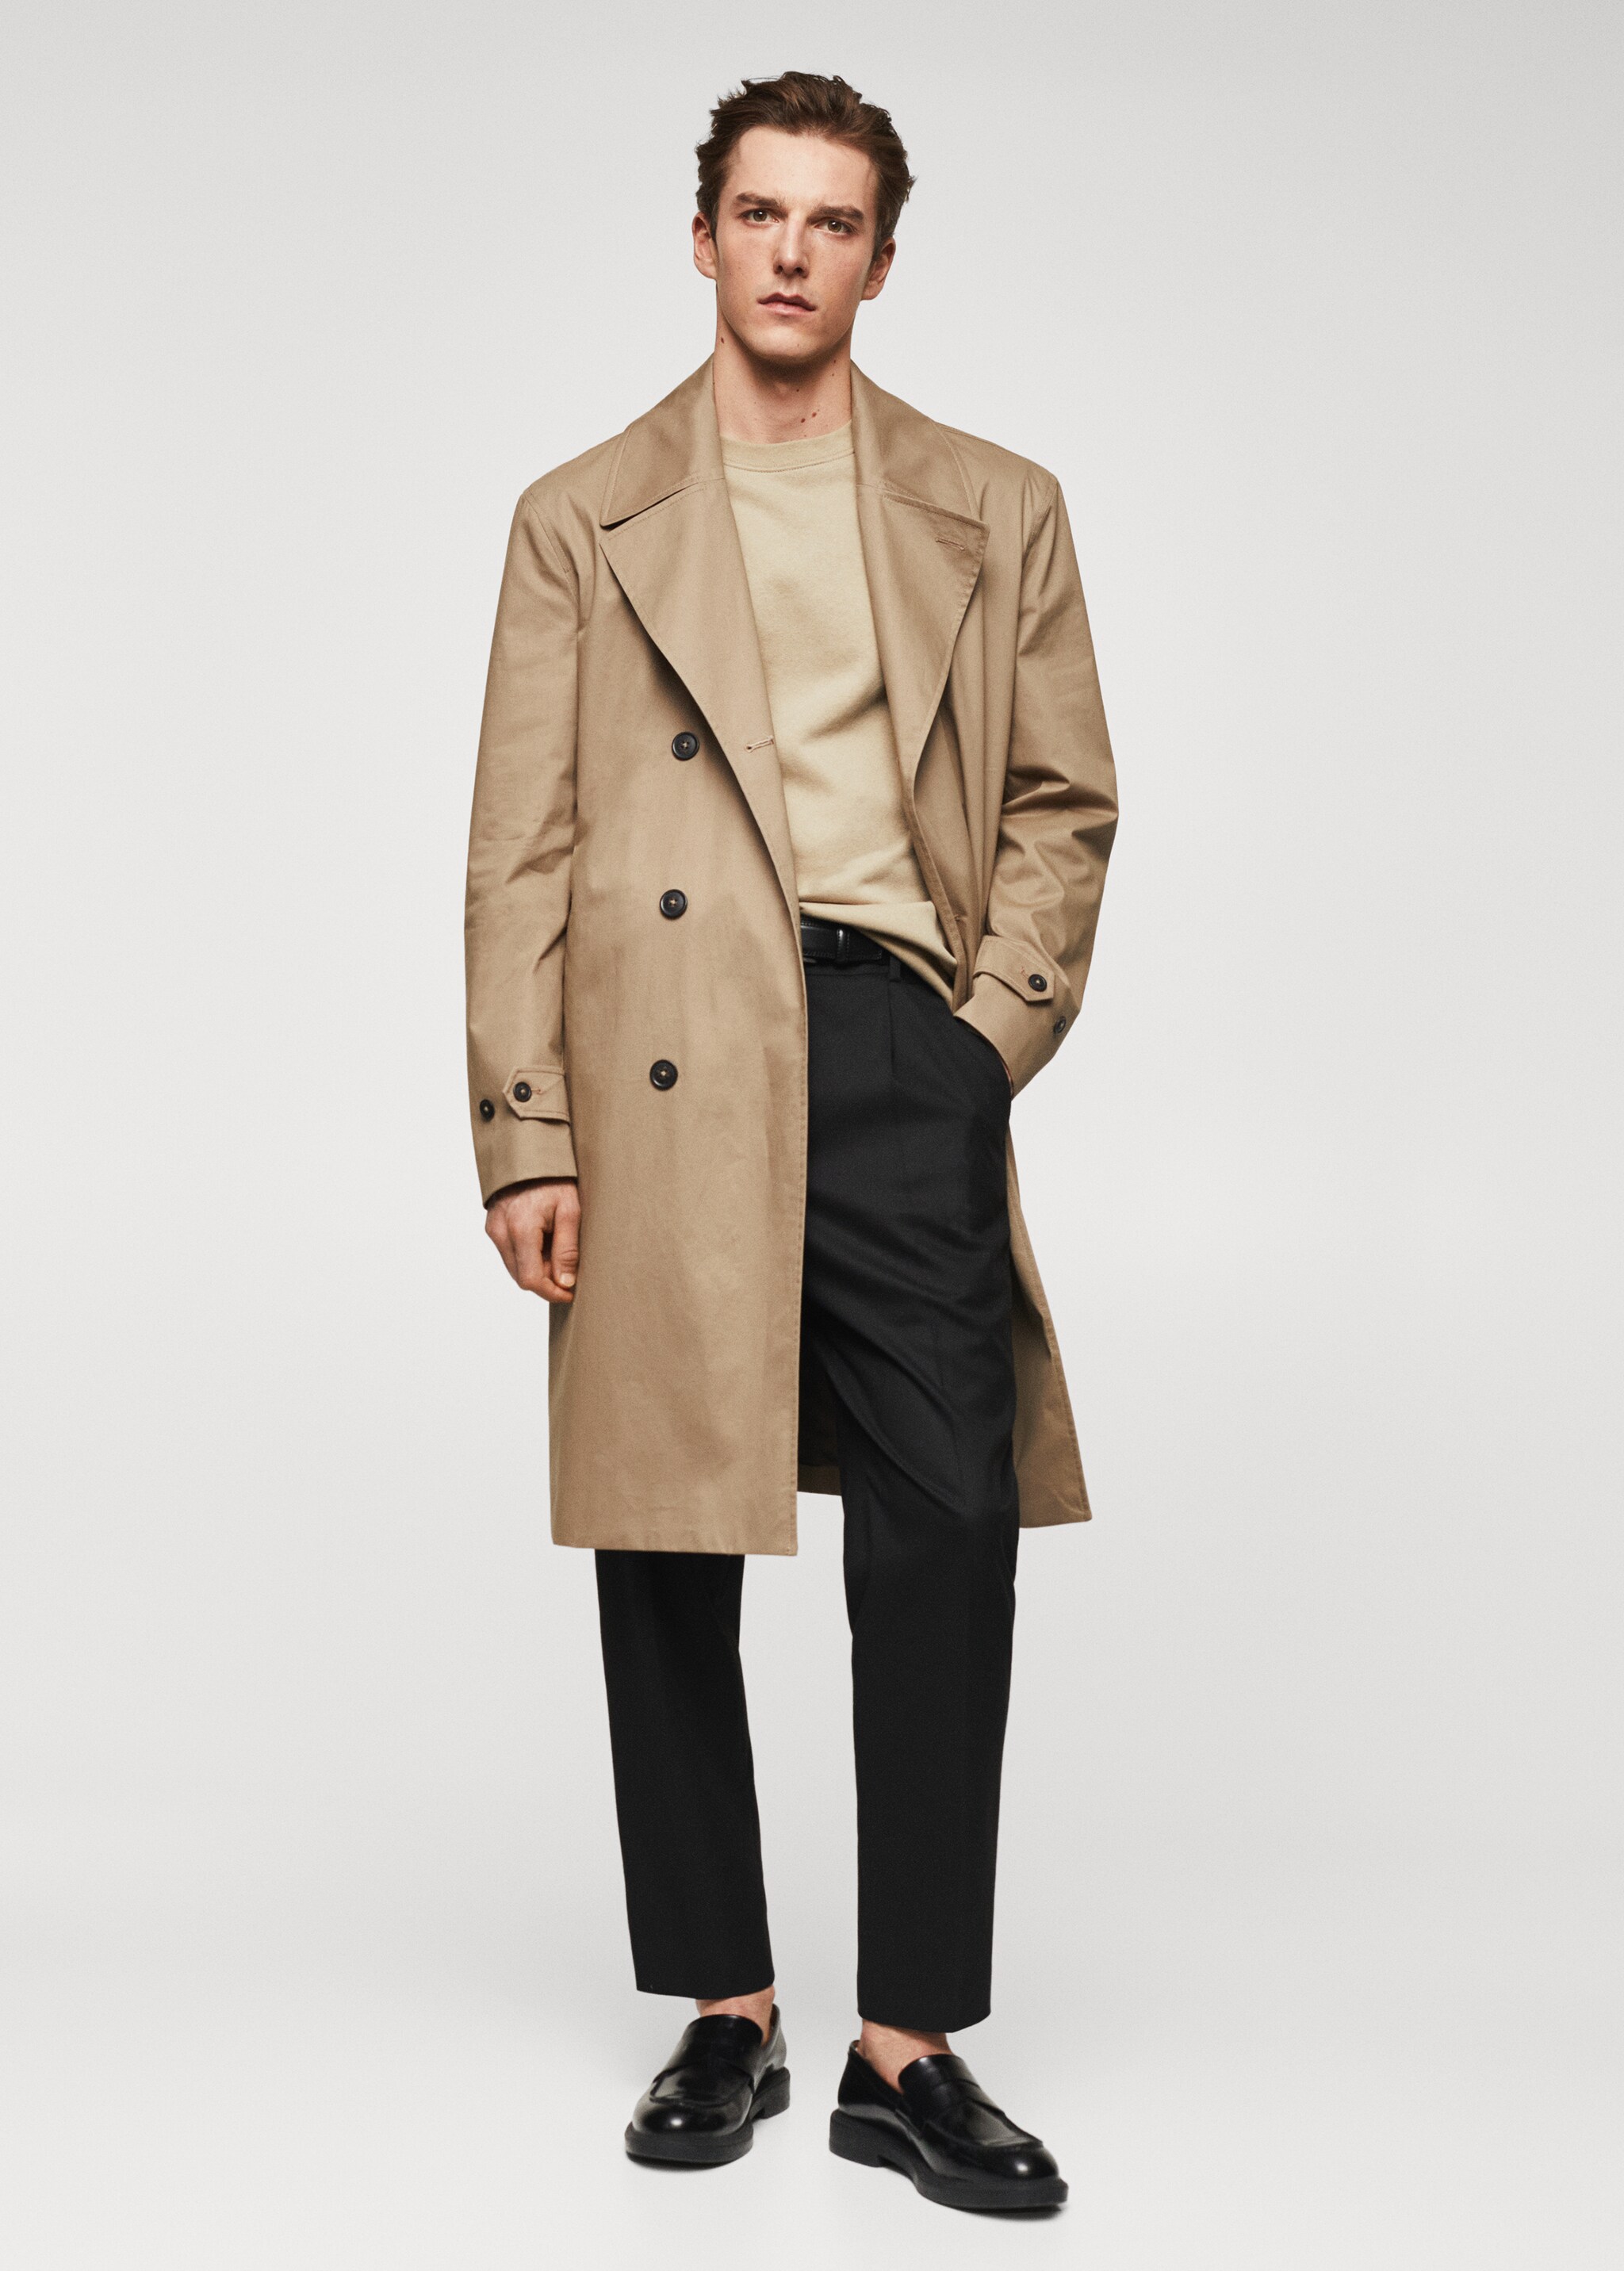 Classic 100% cotton trench coat - General plane